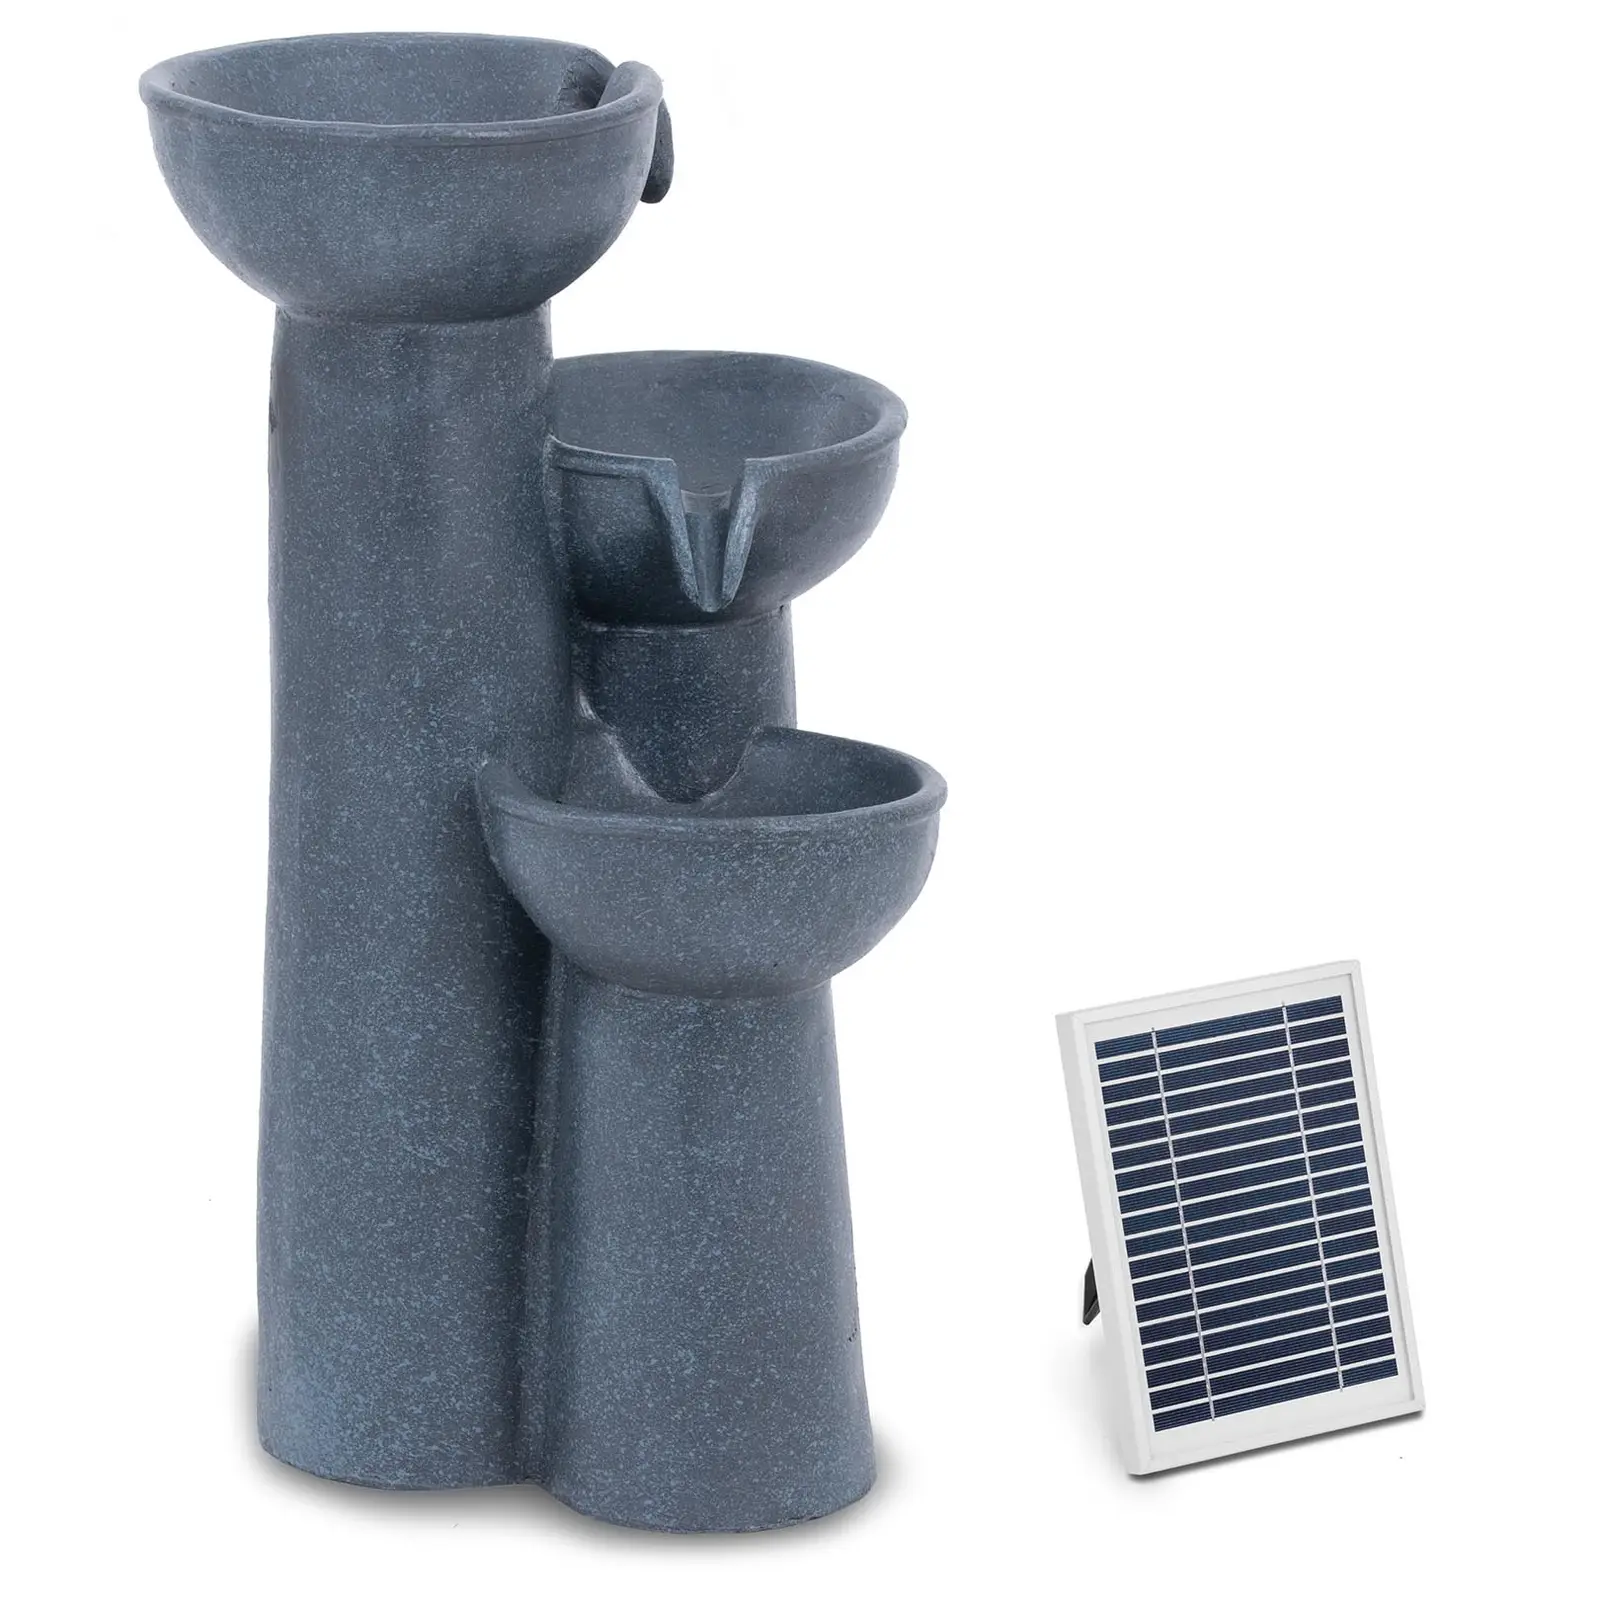 Solar Water Fountain - 3 bowls on columns - LED lighting